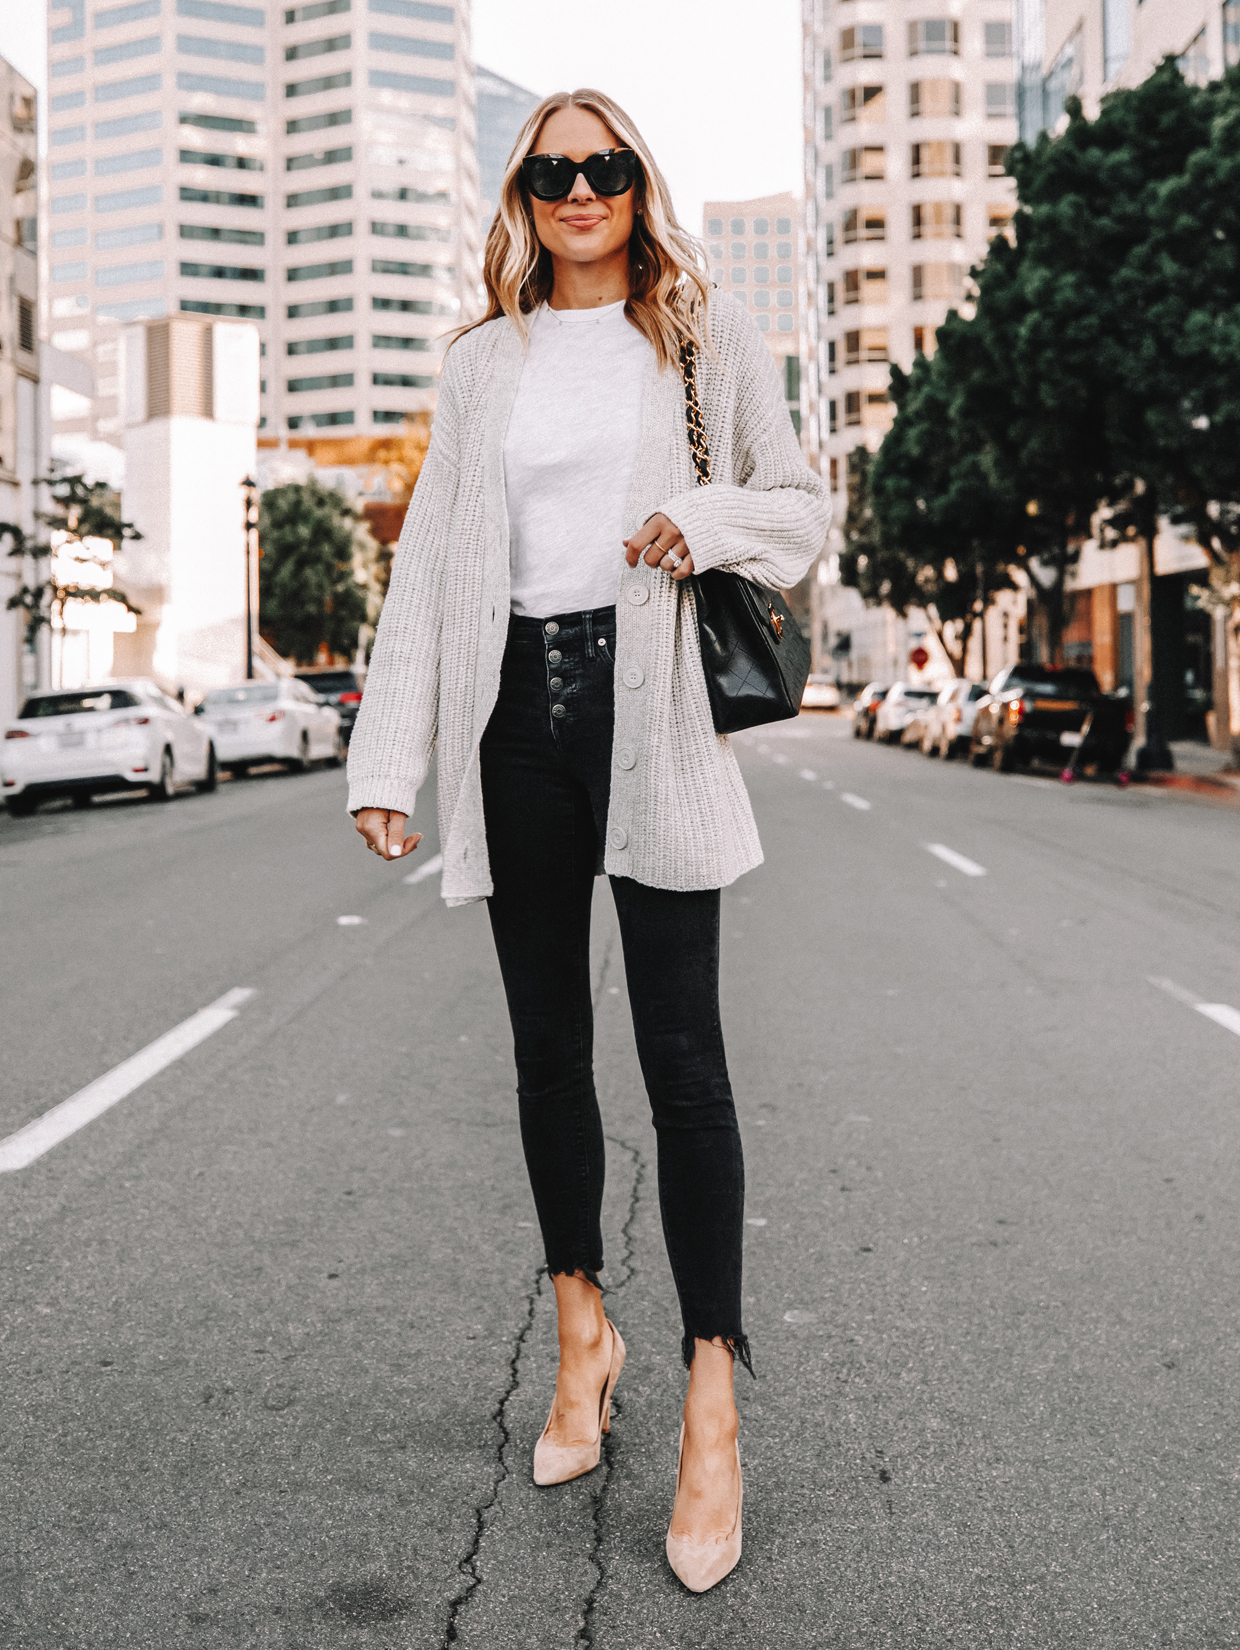 Styling a Chunky Cardigan With My Favorite White T-Shirt, Jeans and Heels -  Fashion Jackson